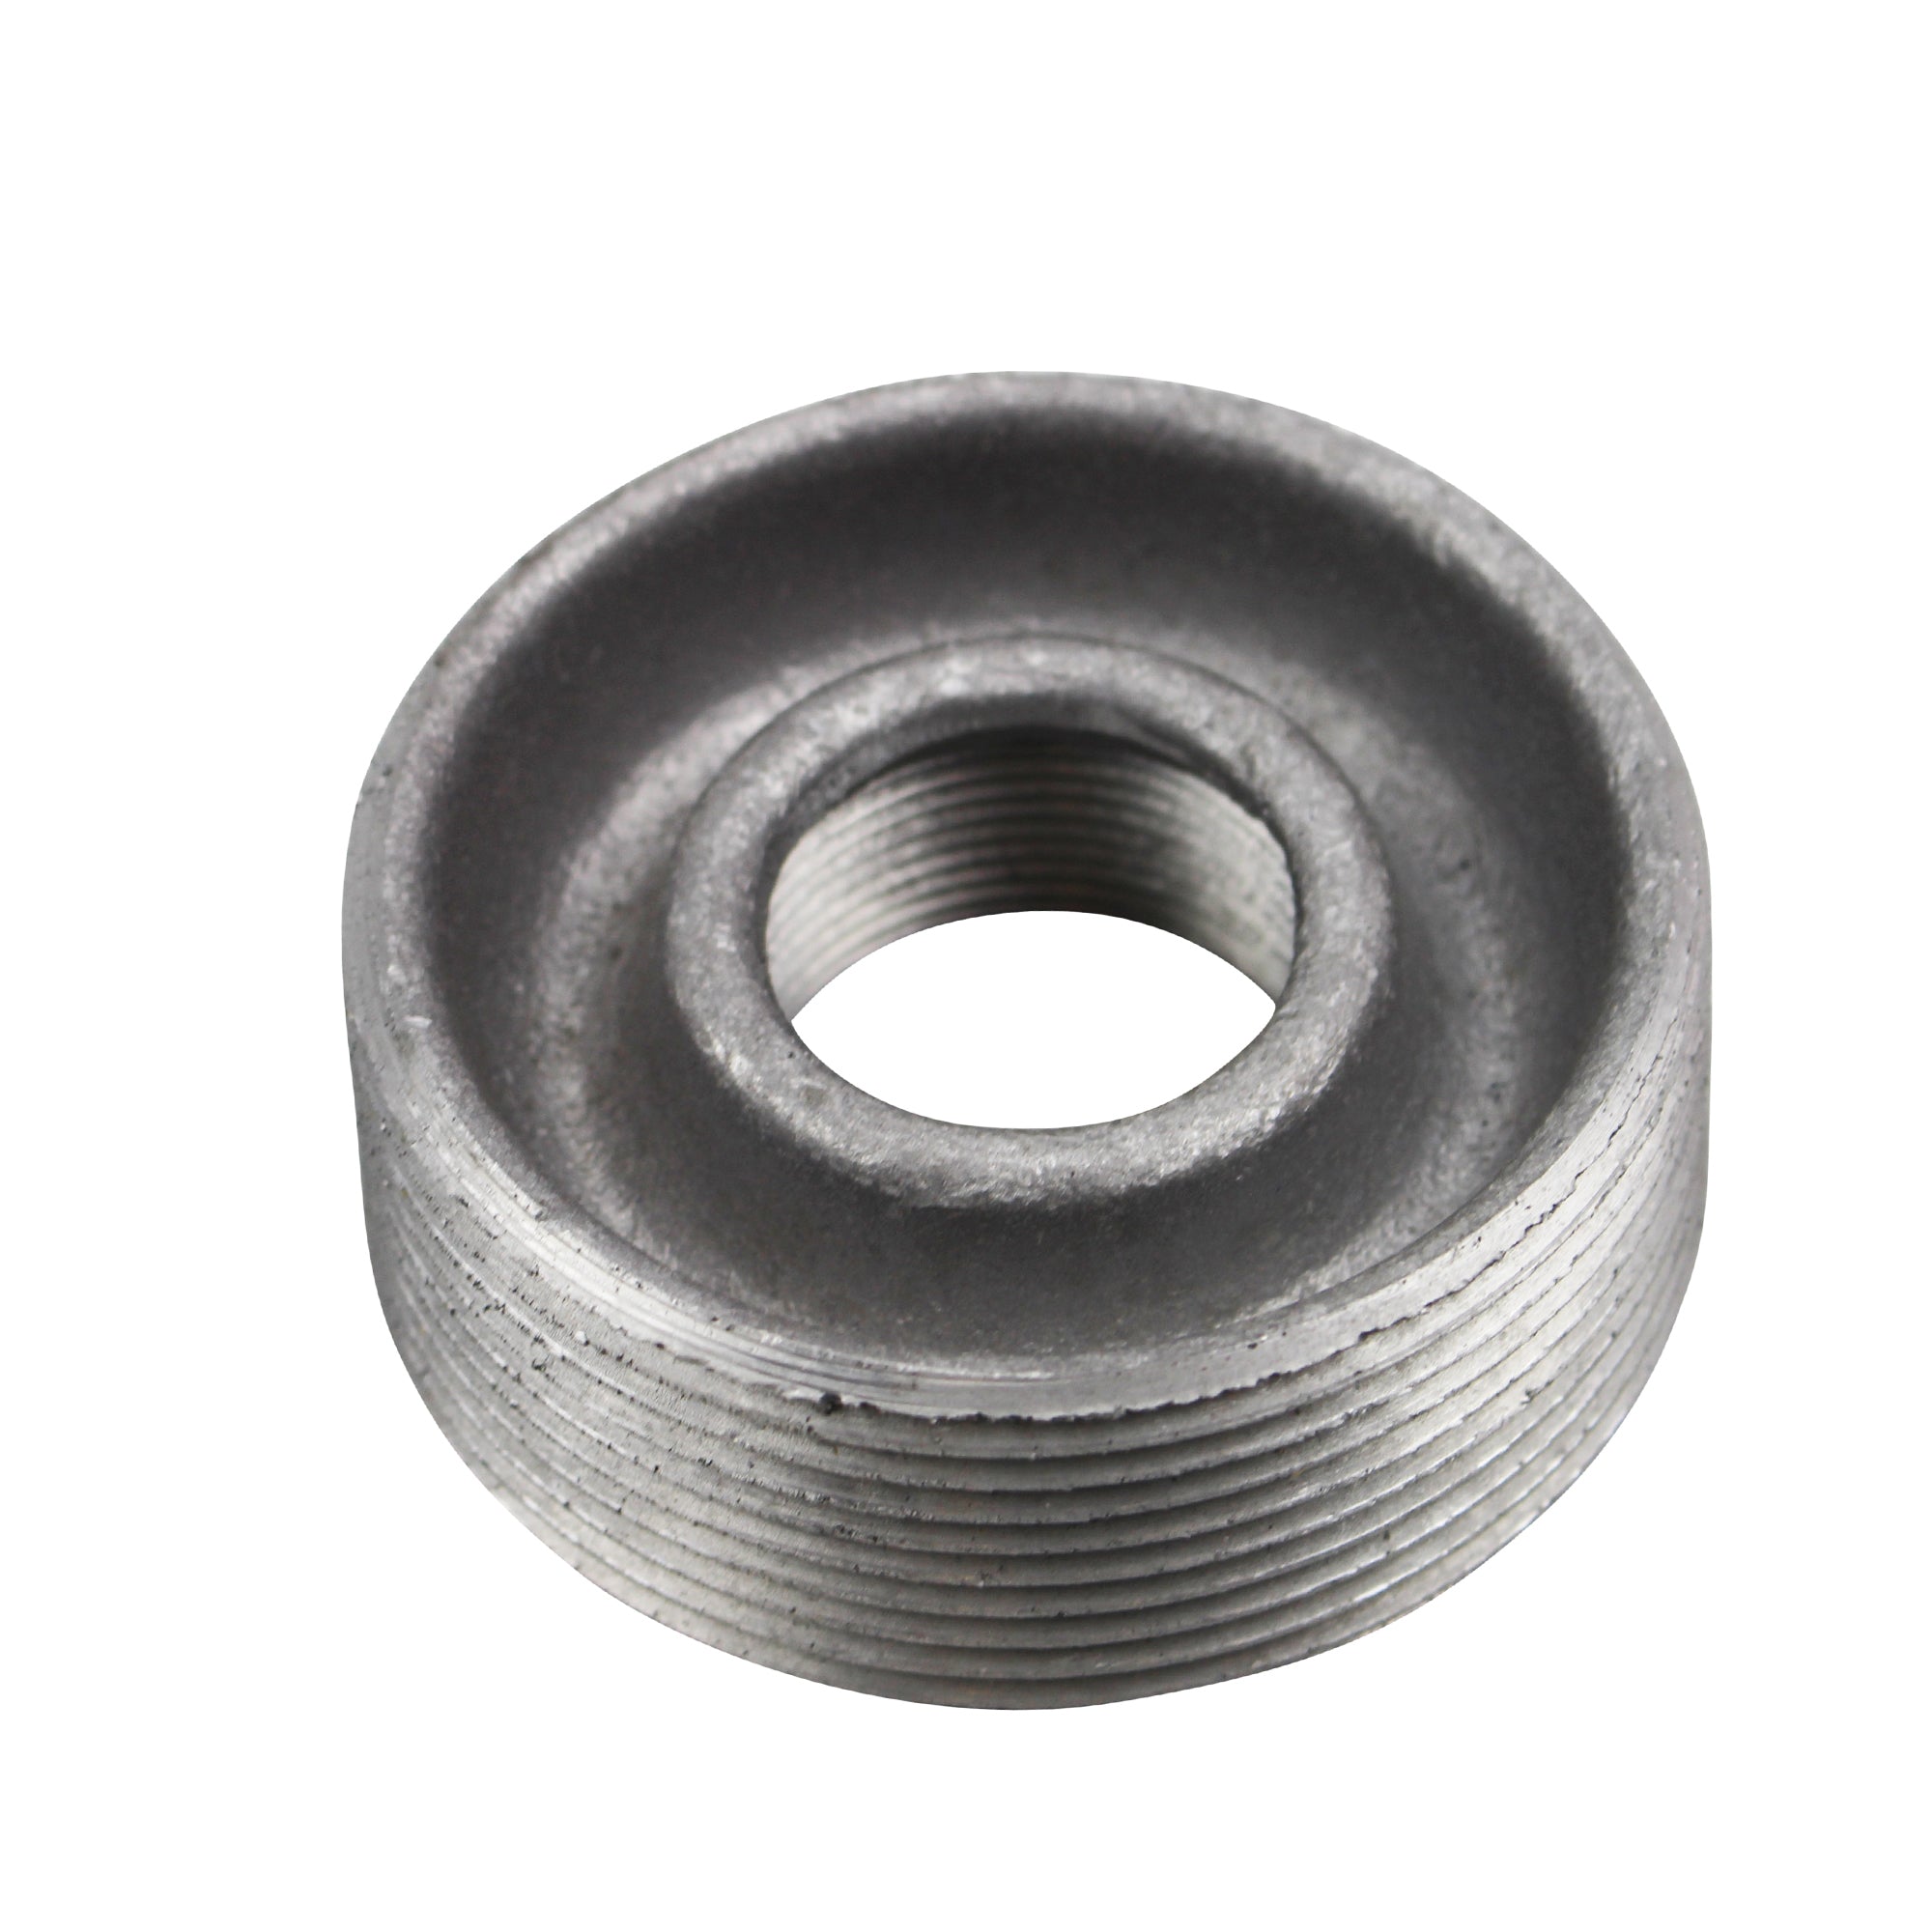 Crouse Hinds, COOPER CROUSE-HINDS RE84-SA CONDUIT REDUCING BUSHING, 1-1/4" X 3", (2 PACK)